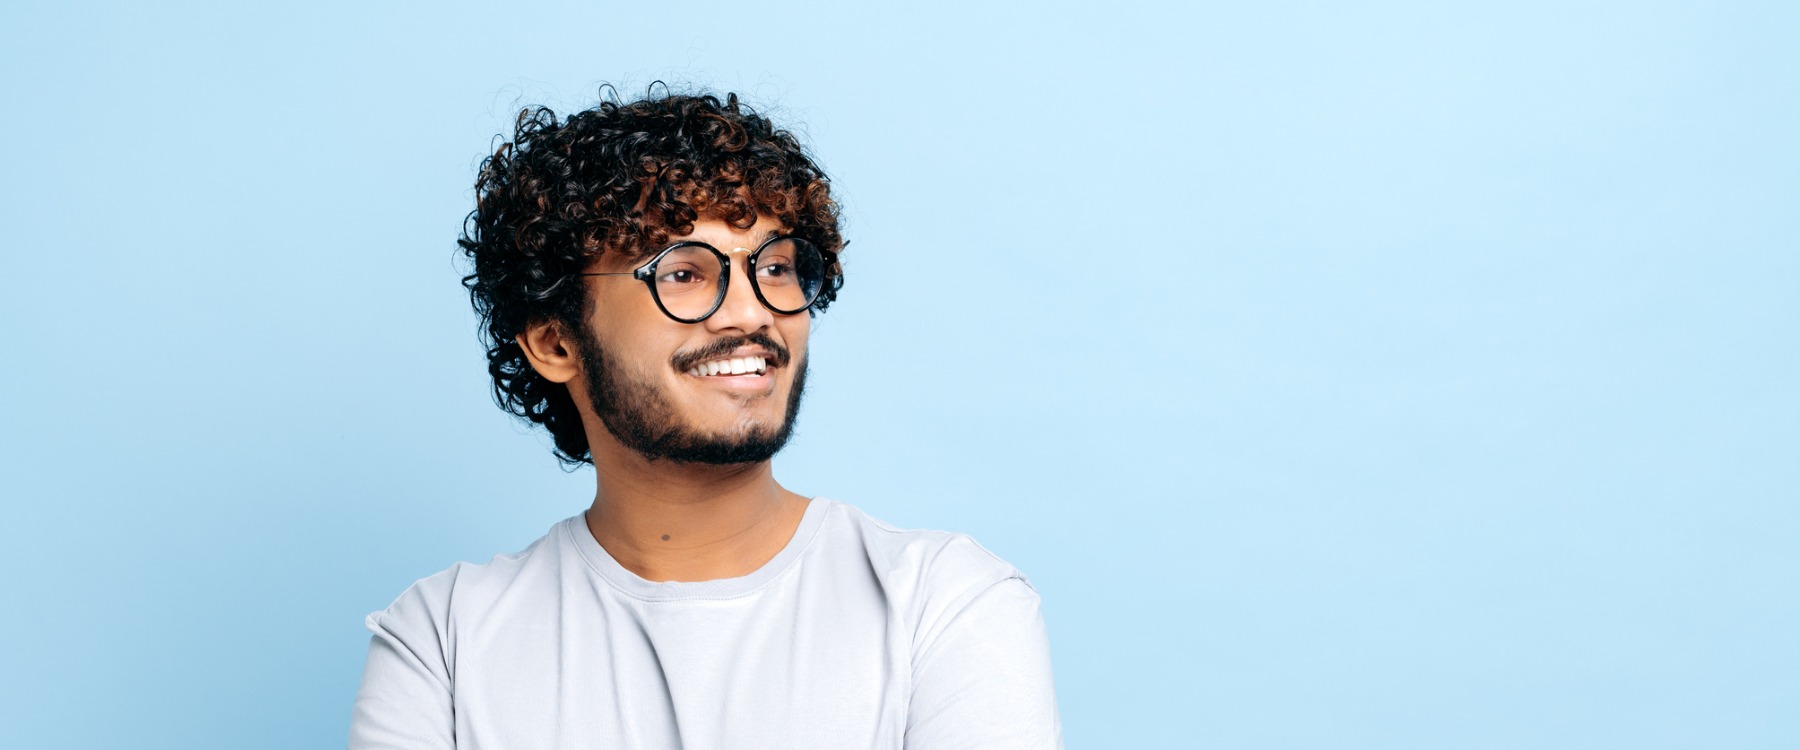 Guy with curly hair smiling